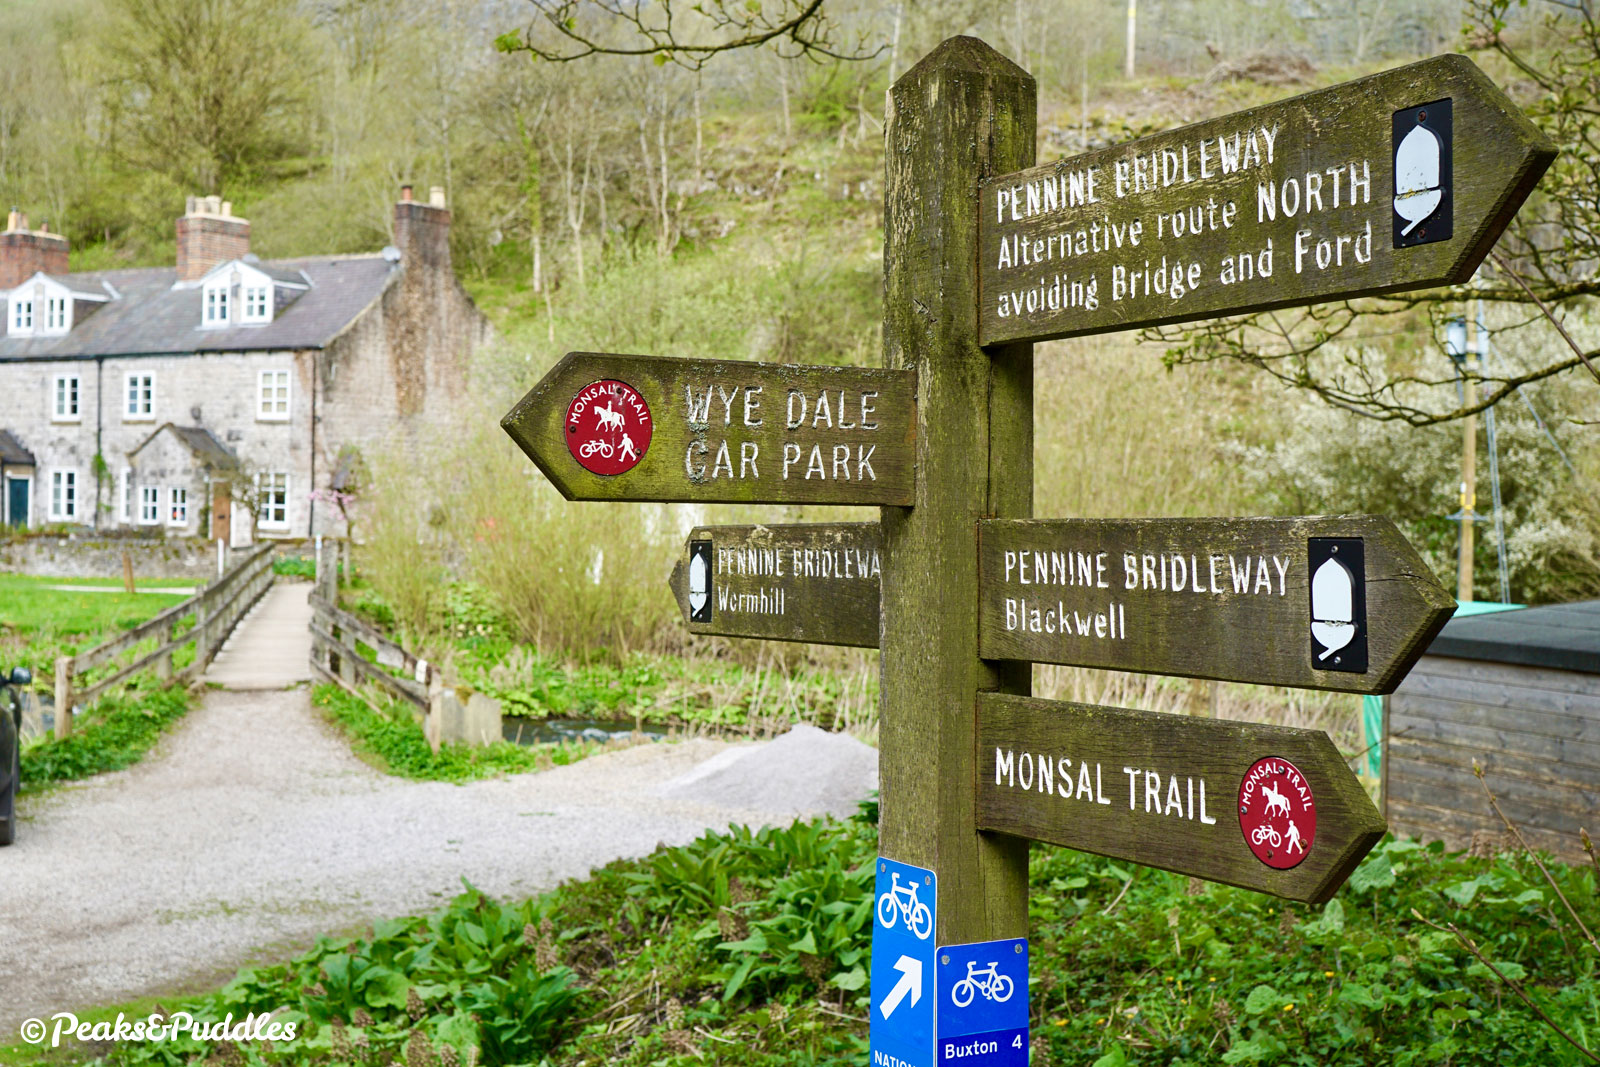 The Pennine Bridleway crosses the trail at Blackwell Mill, but it’s a very tricky route into the valley without good mountain skills.